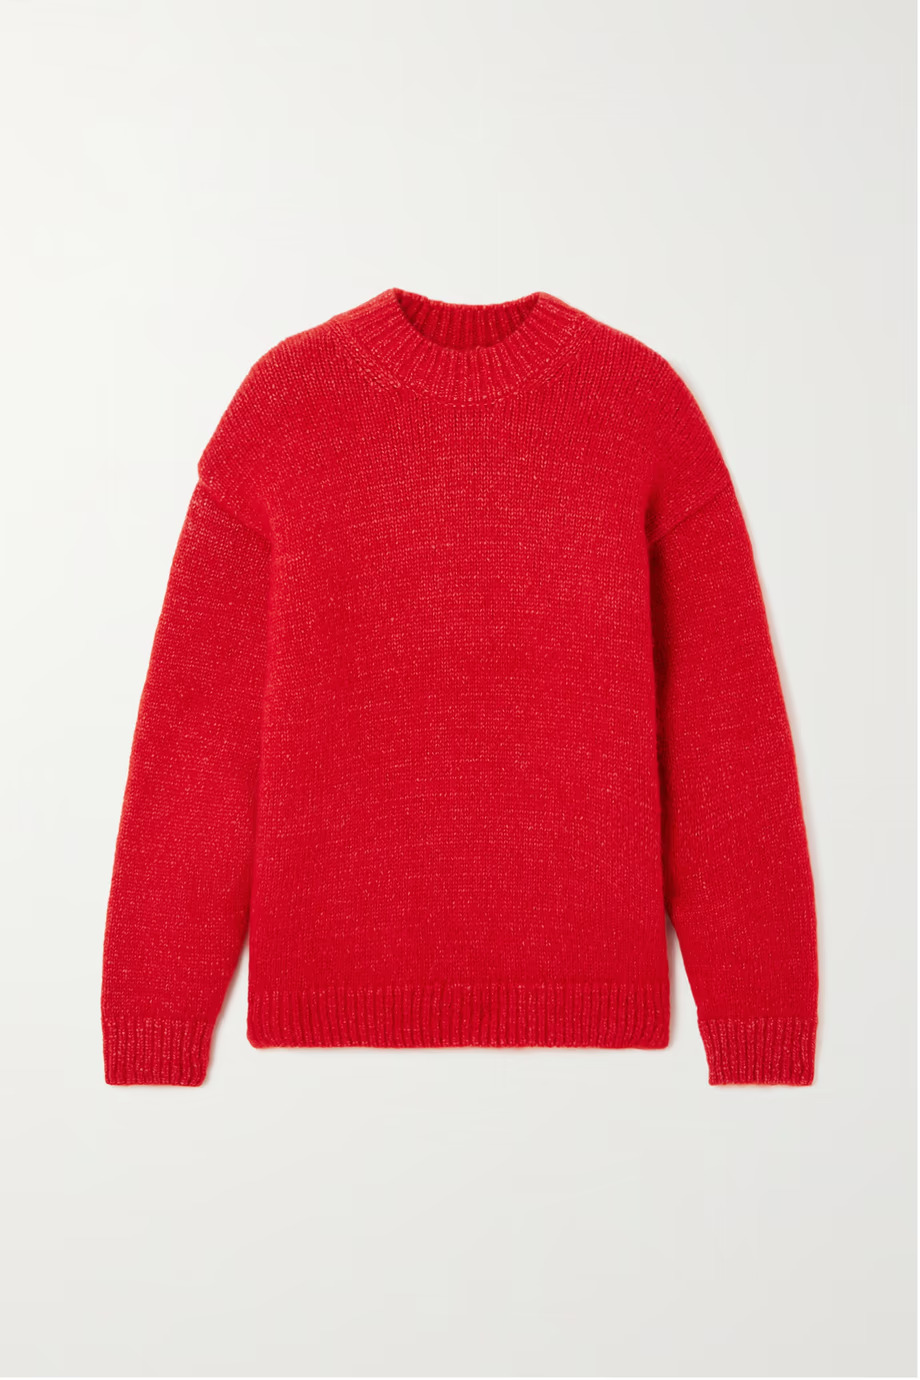 The Best Red Jumpers and Cardigans to Shop for Winter | Who What Wear UK